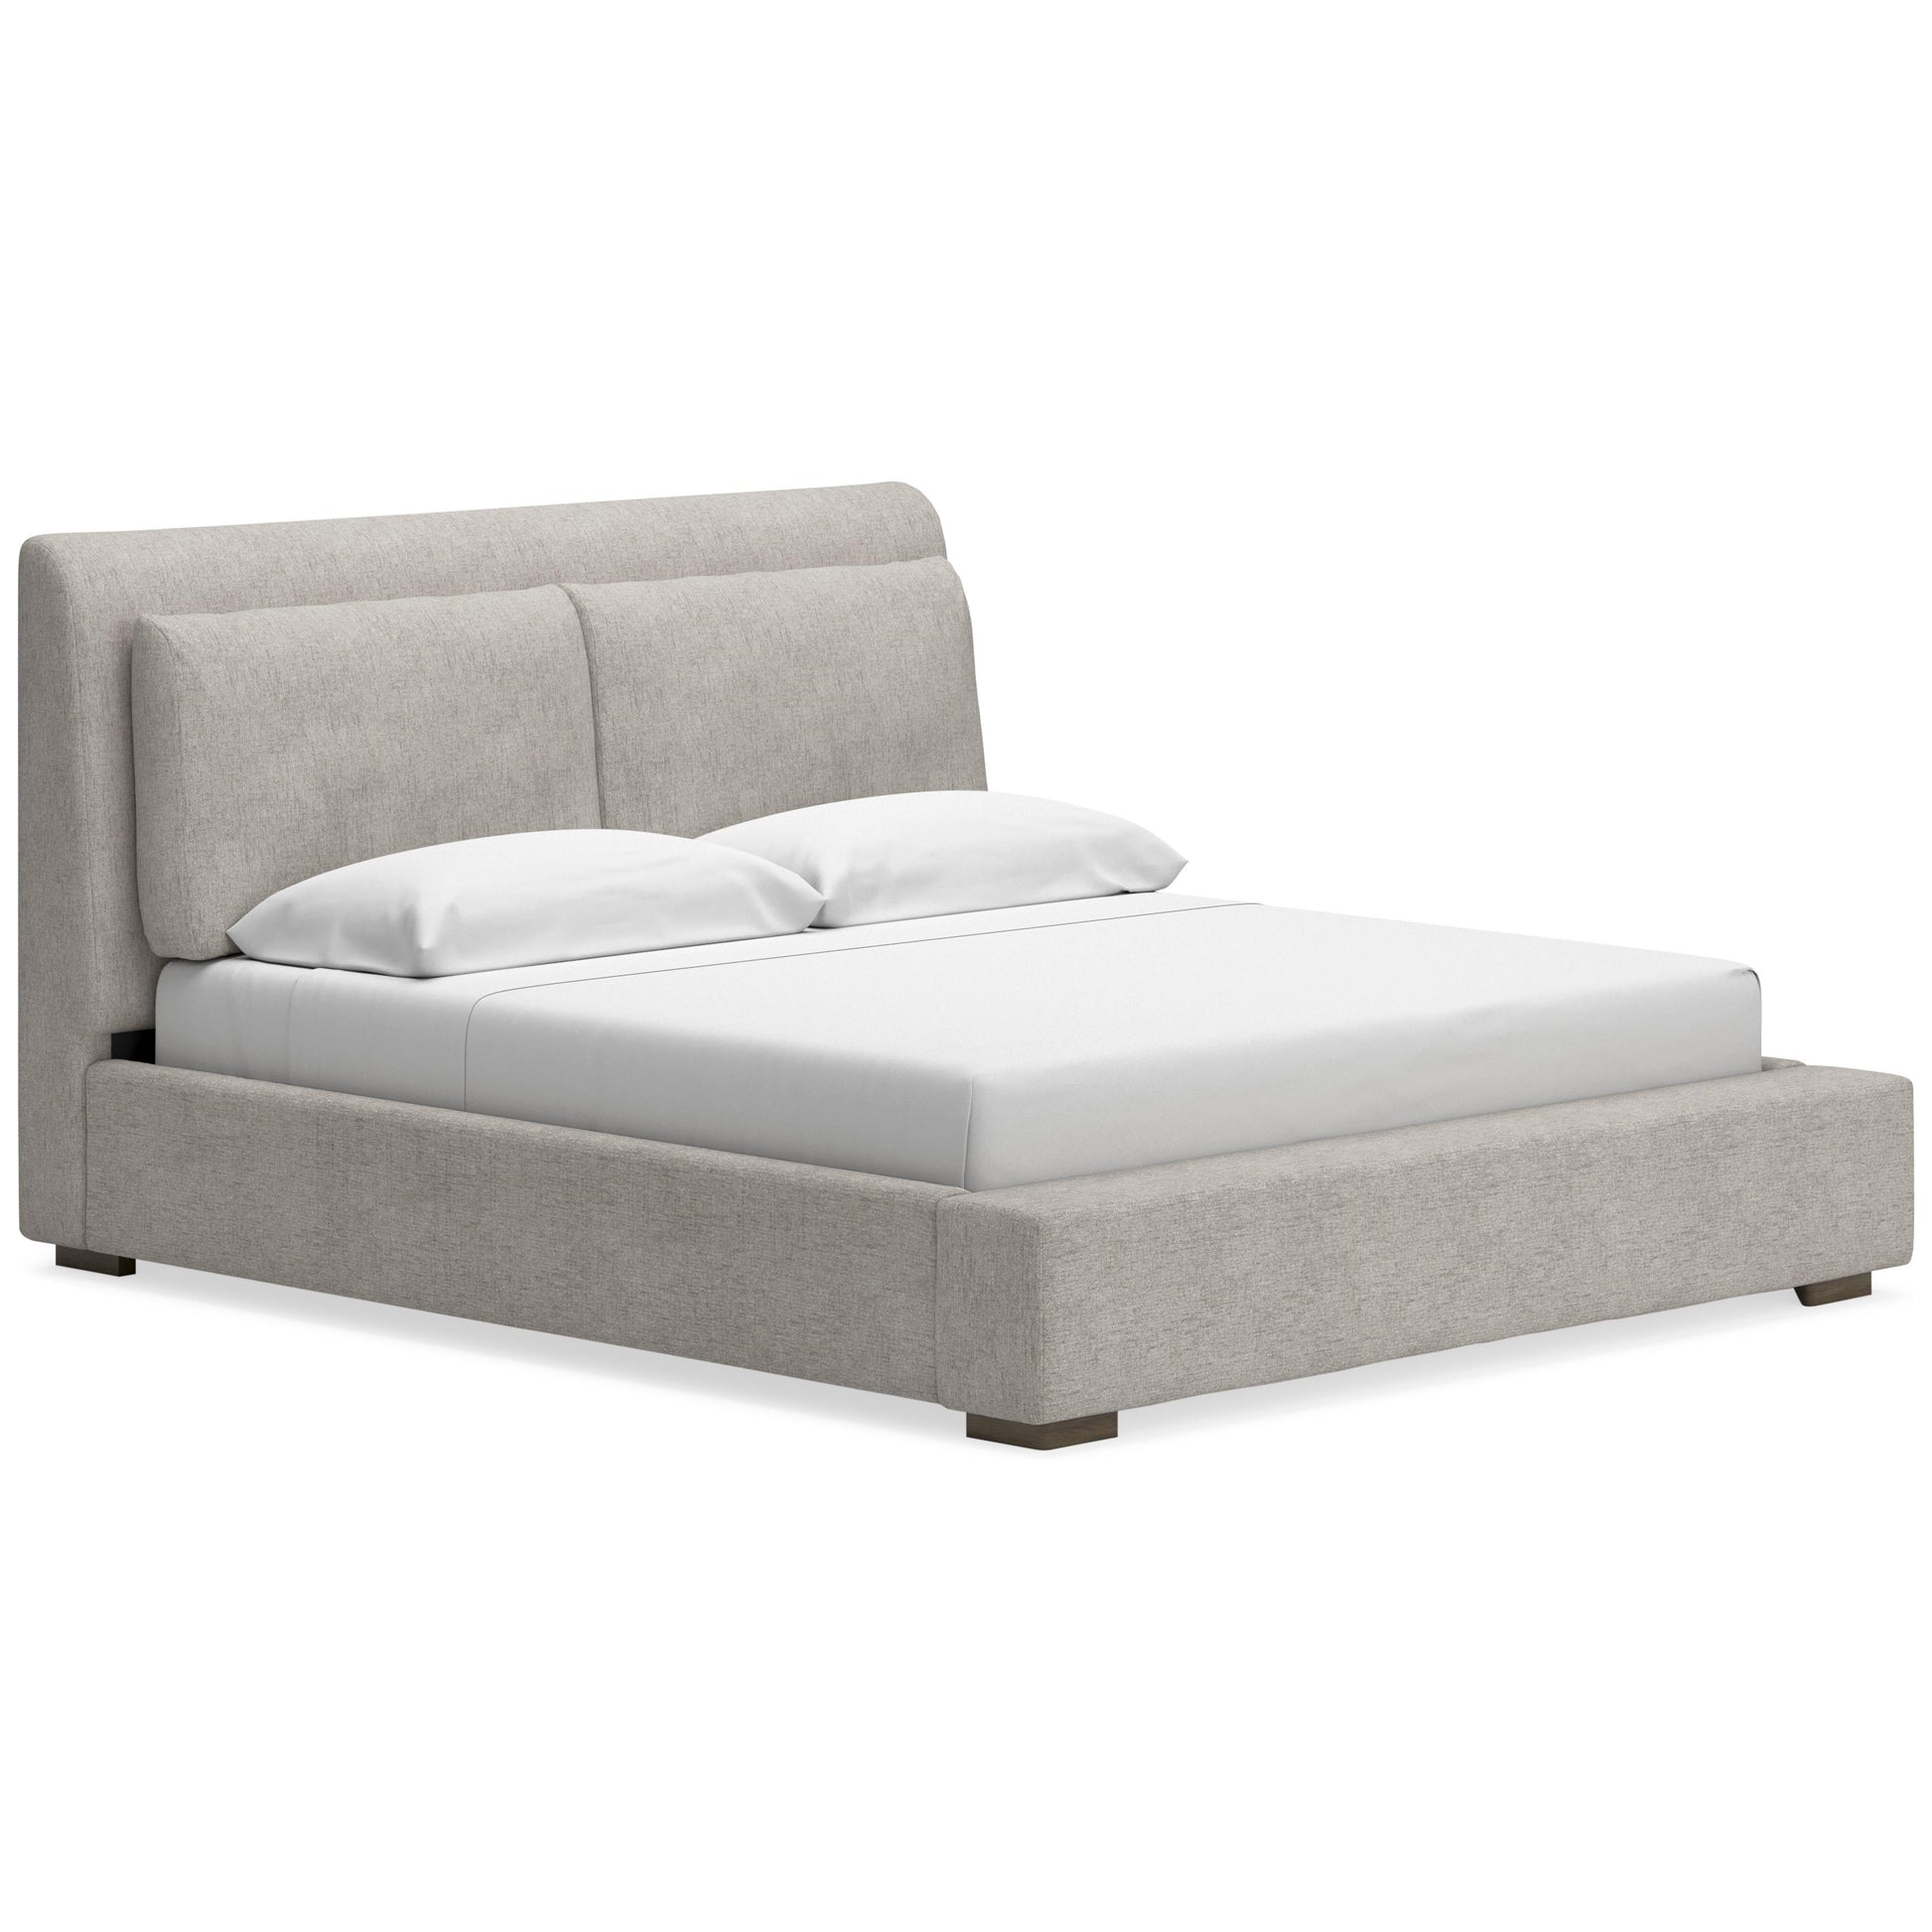 Signature Design by Ashley Cabalynn King Upholstered Bed B974-78/B974-76 IMAGE 1